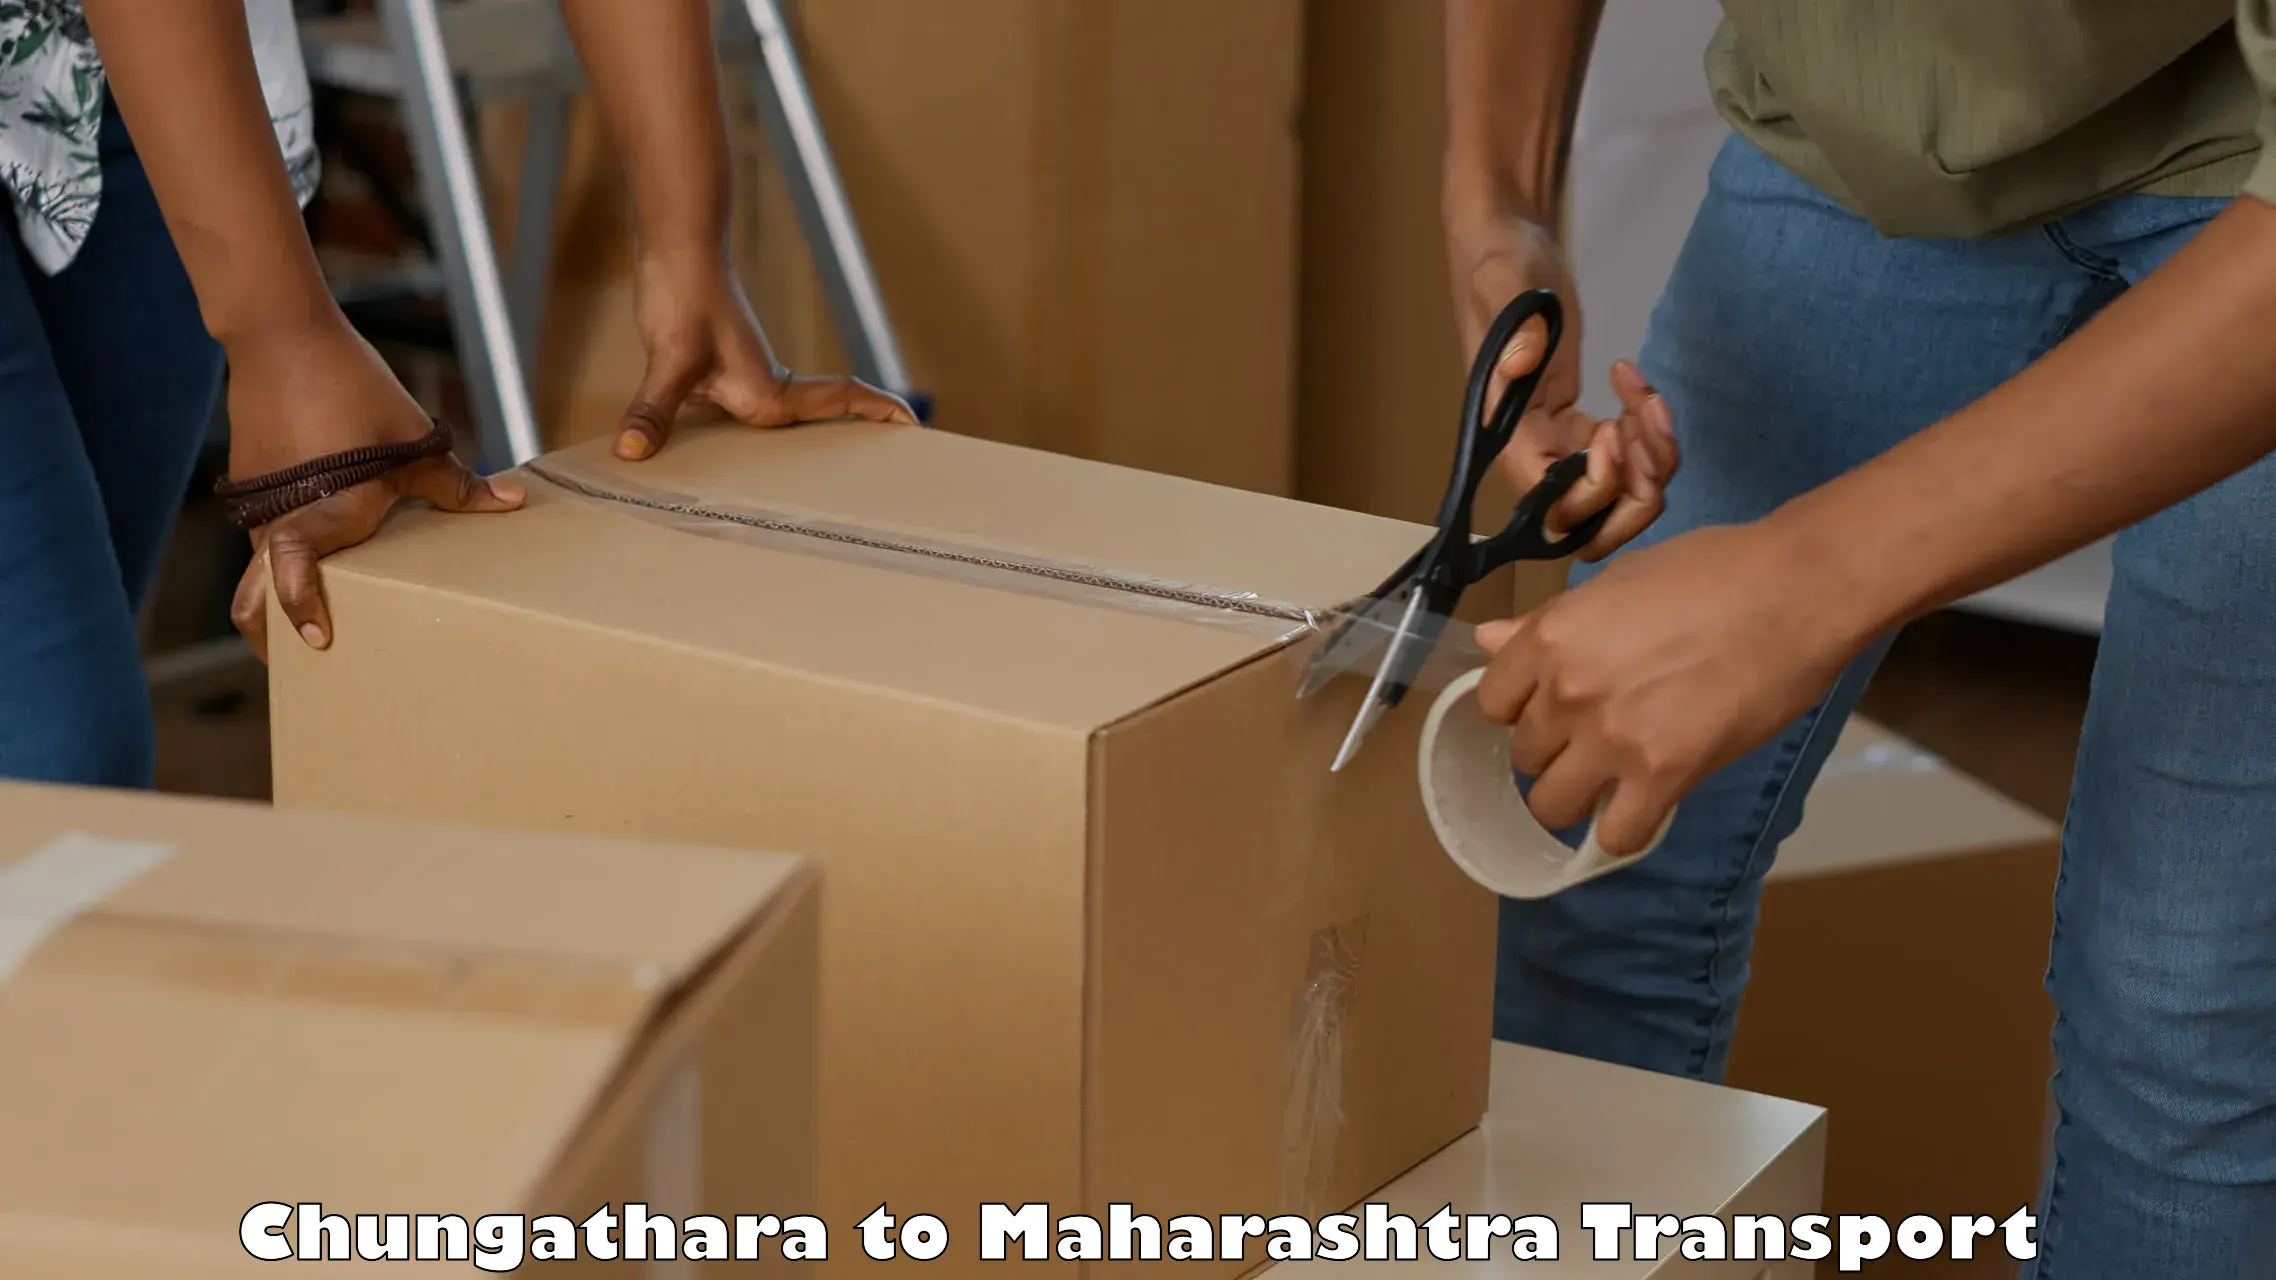 Material transport services Chungathara to Chandrapur